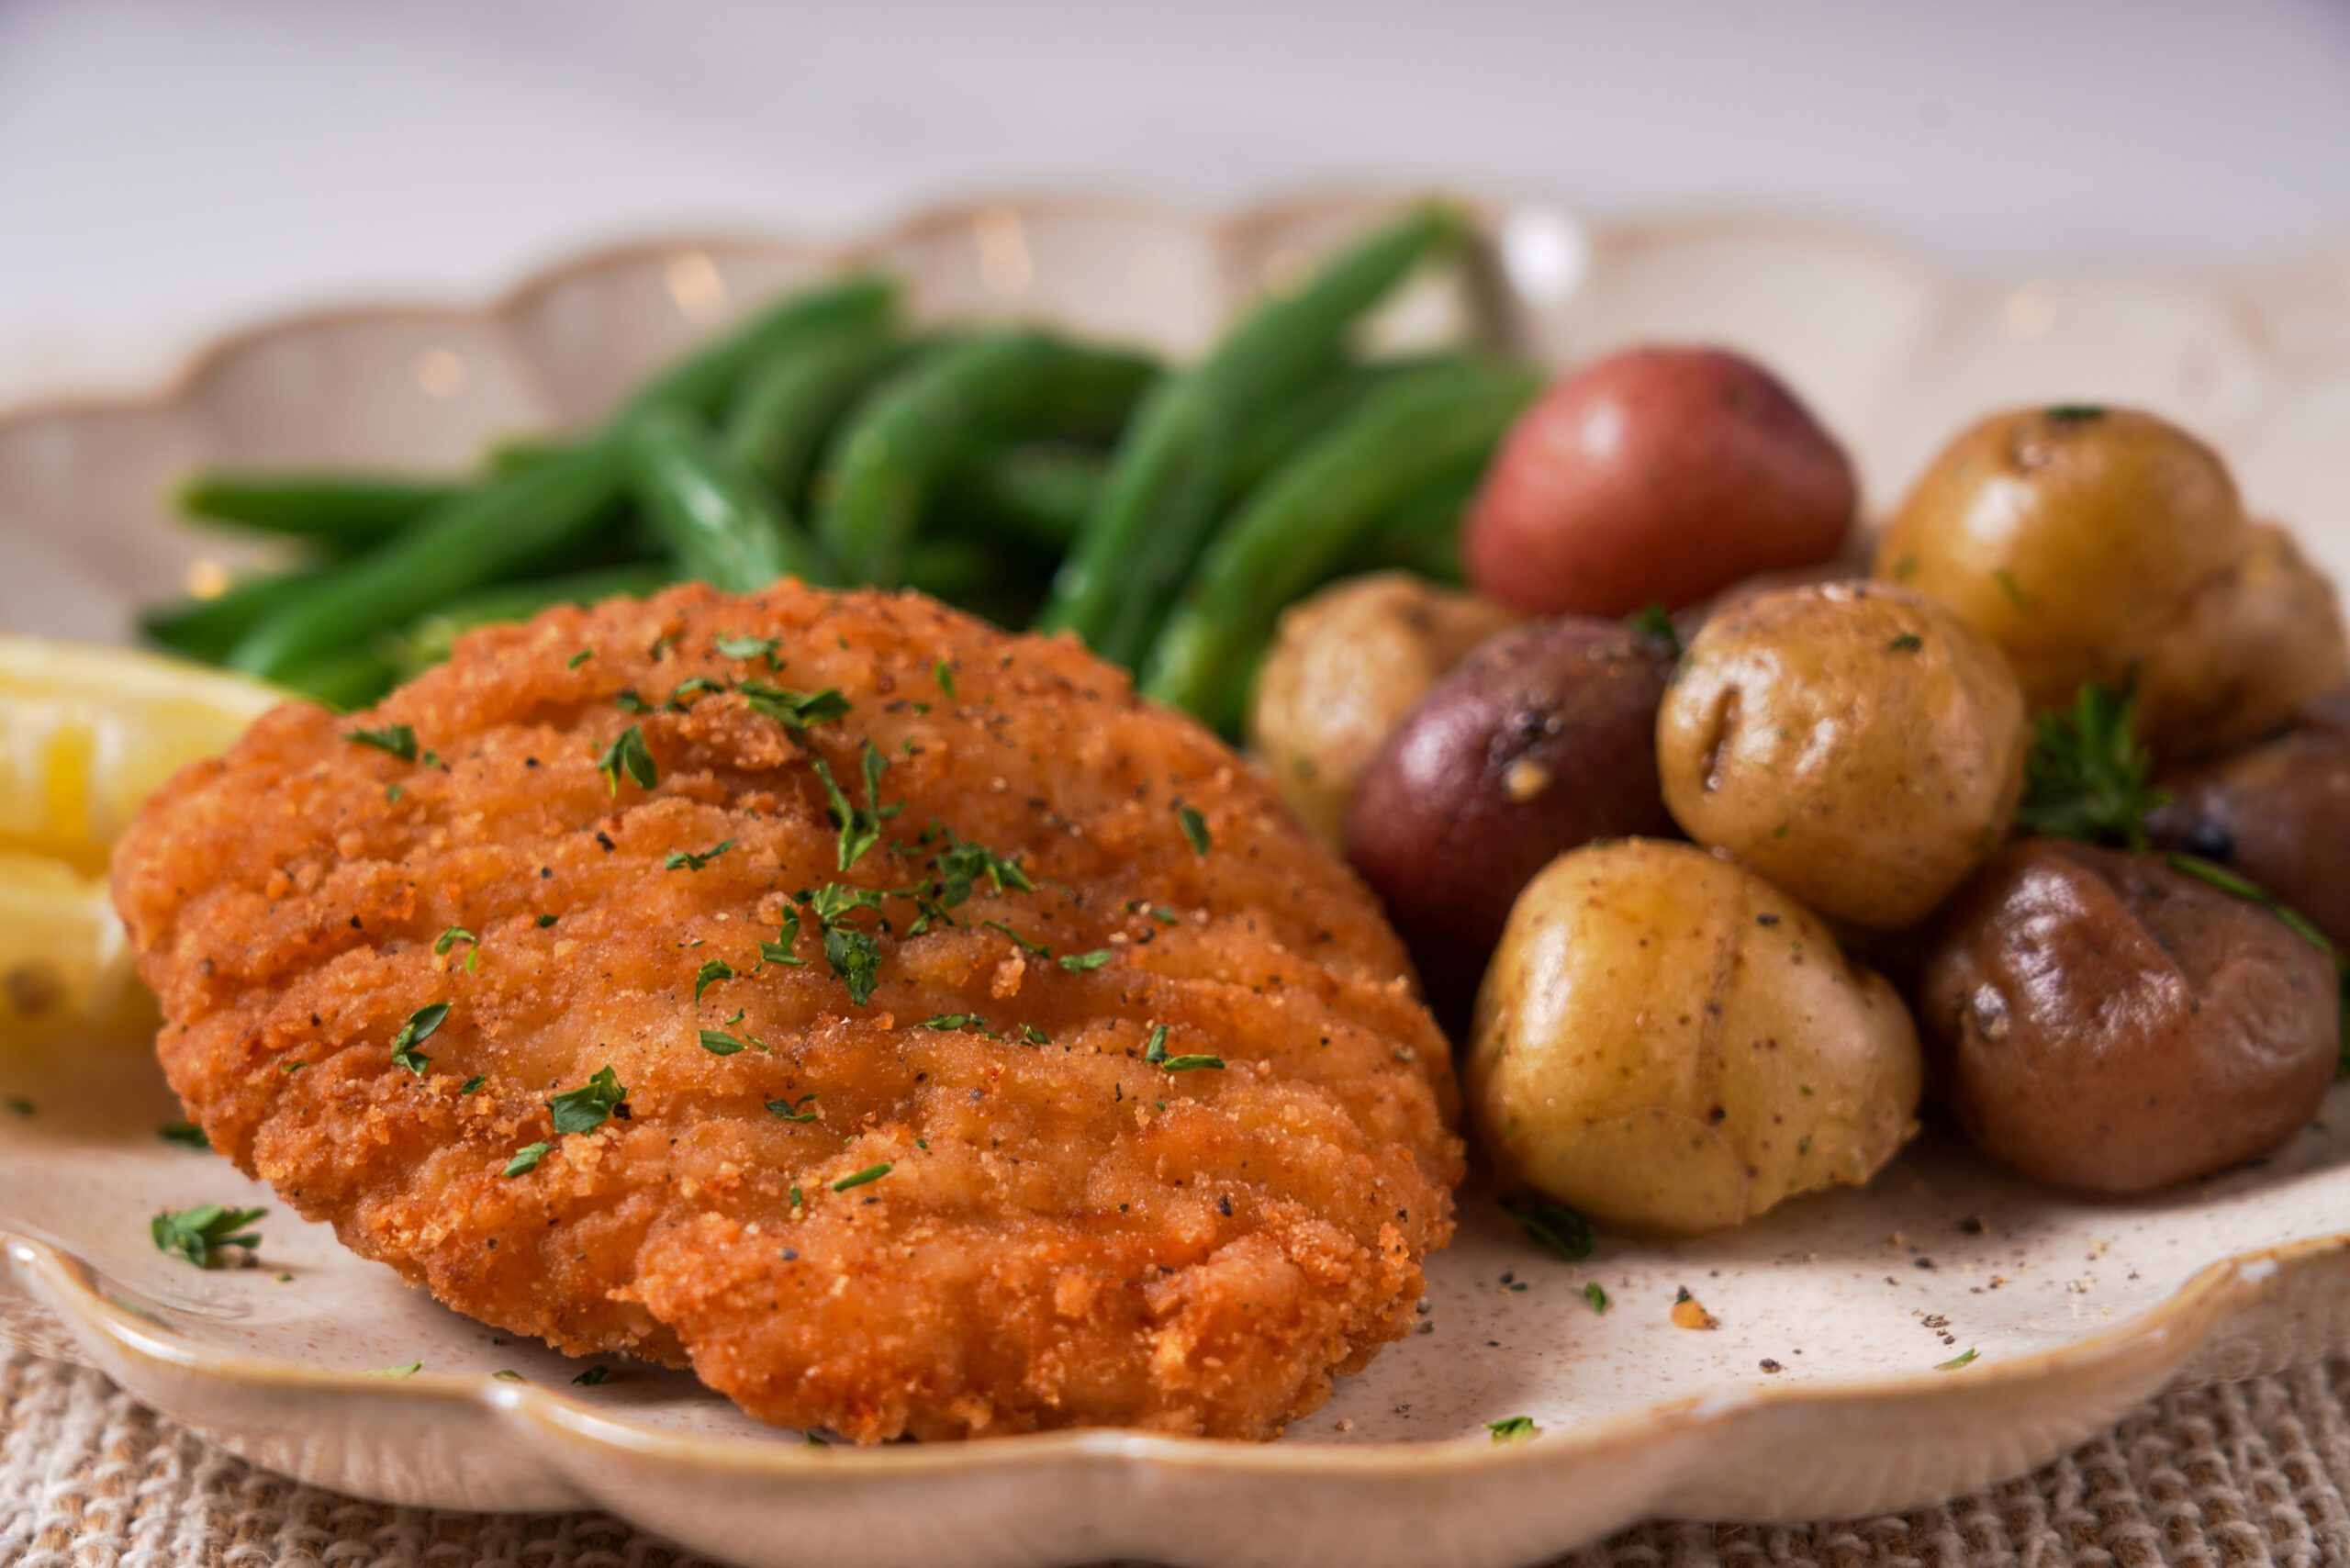 Recipe for Breaded Chicken Dinner with Mini Potatoes and Green Beans